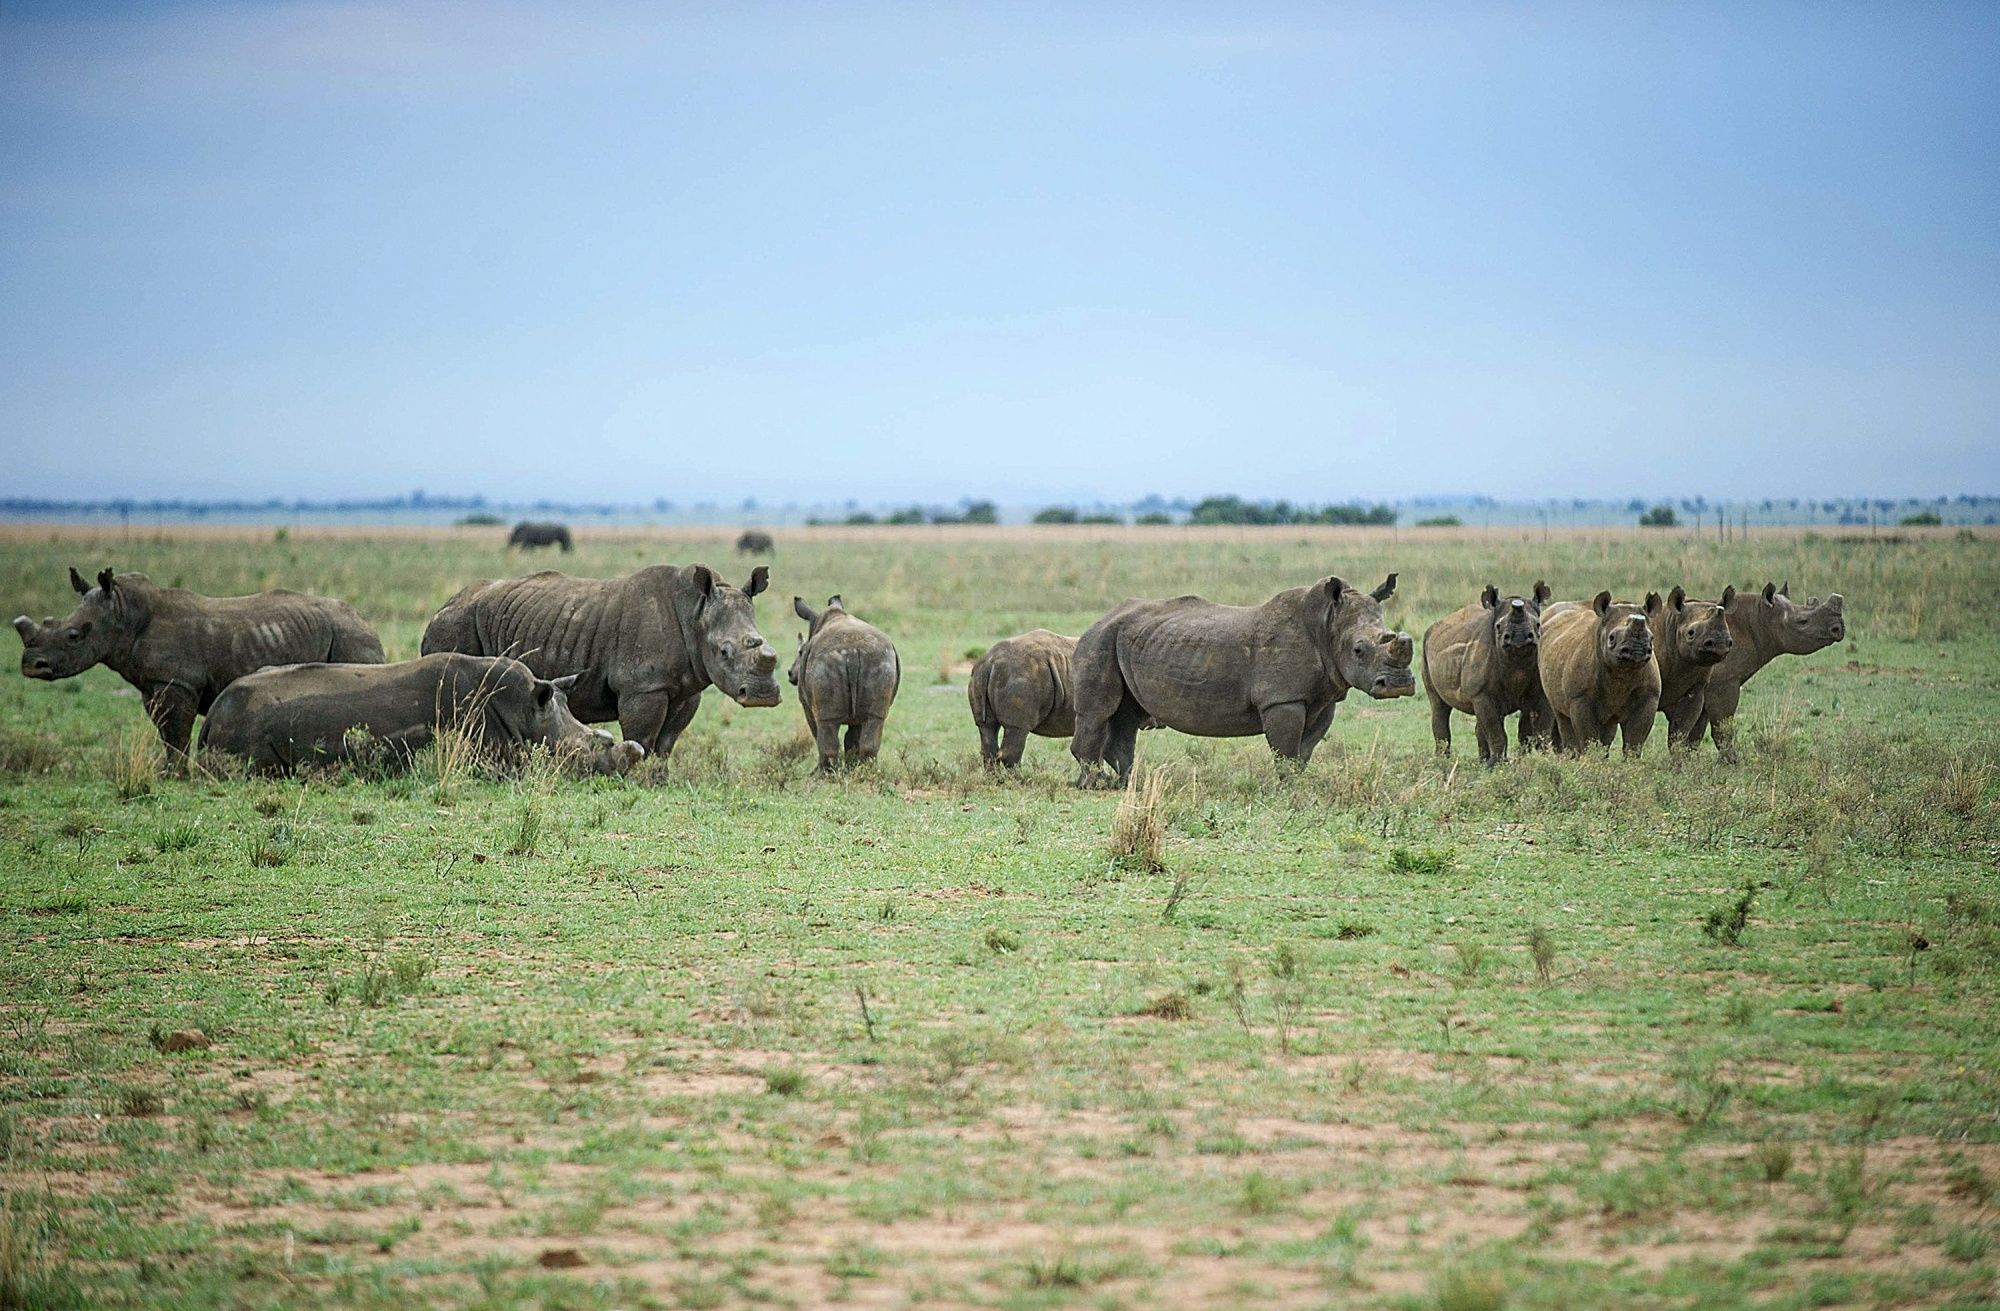 South African Rhino Conservationist John Hume auctions off world's largest Rhino farm